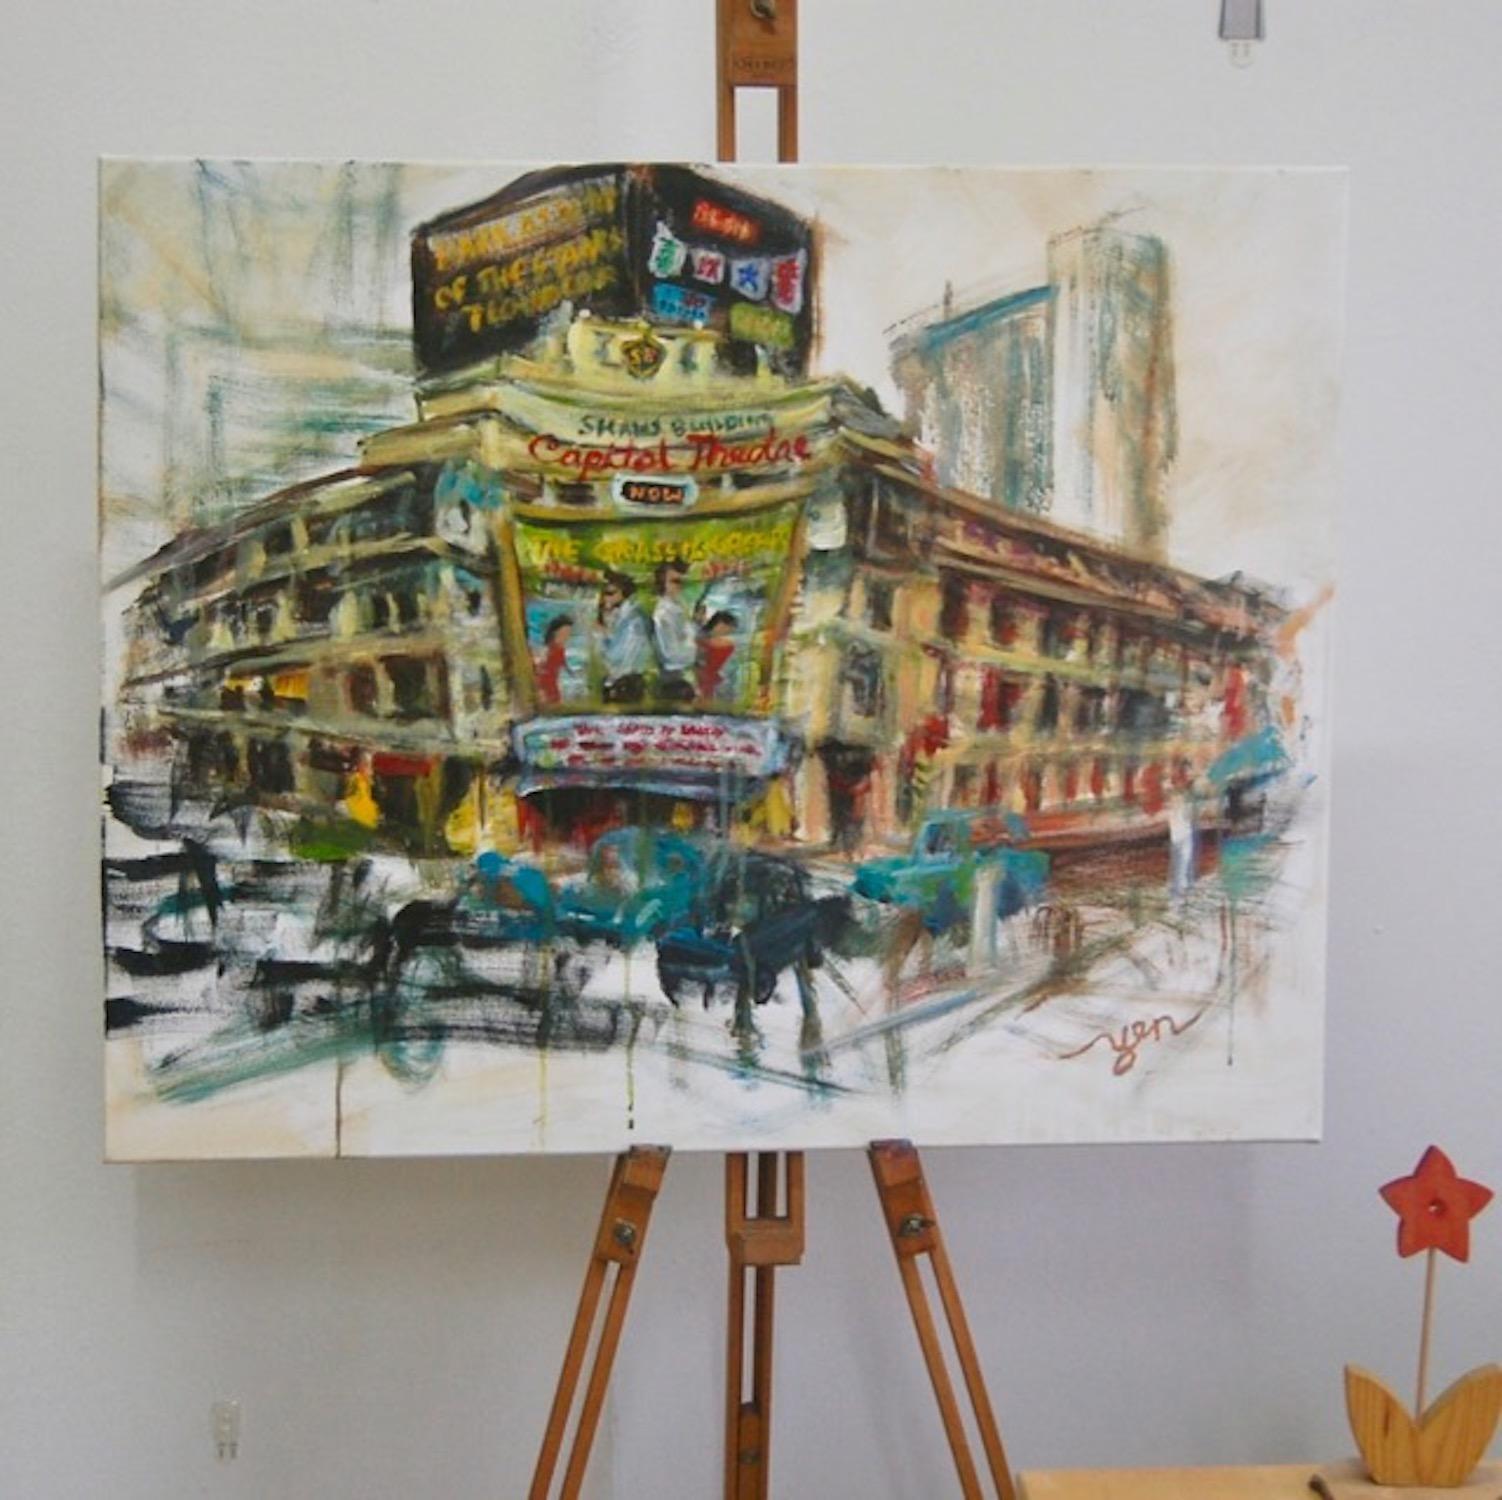 Yesteryear - Capitol Cinema Painting Art, original canvas artwork in abstract impressionist style of Singapore architectural landmark icon